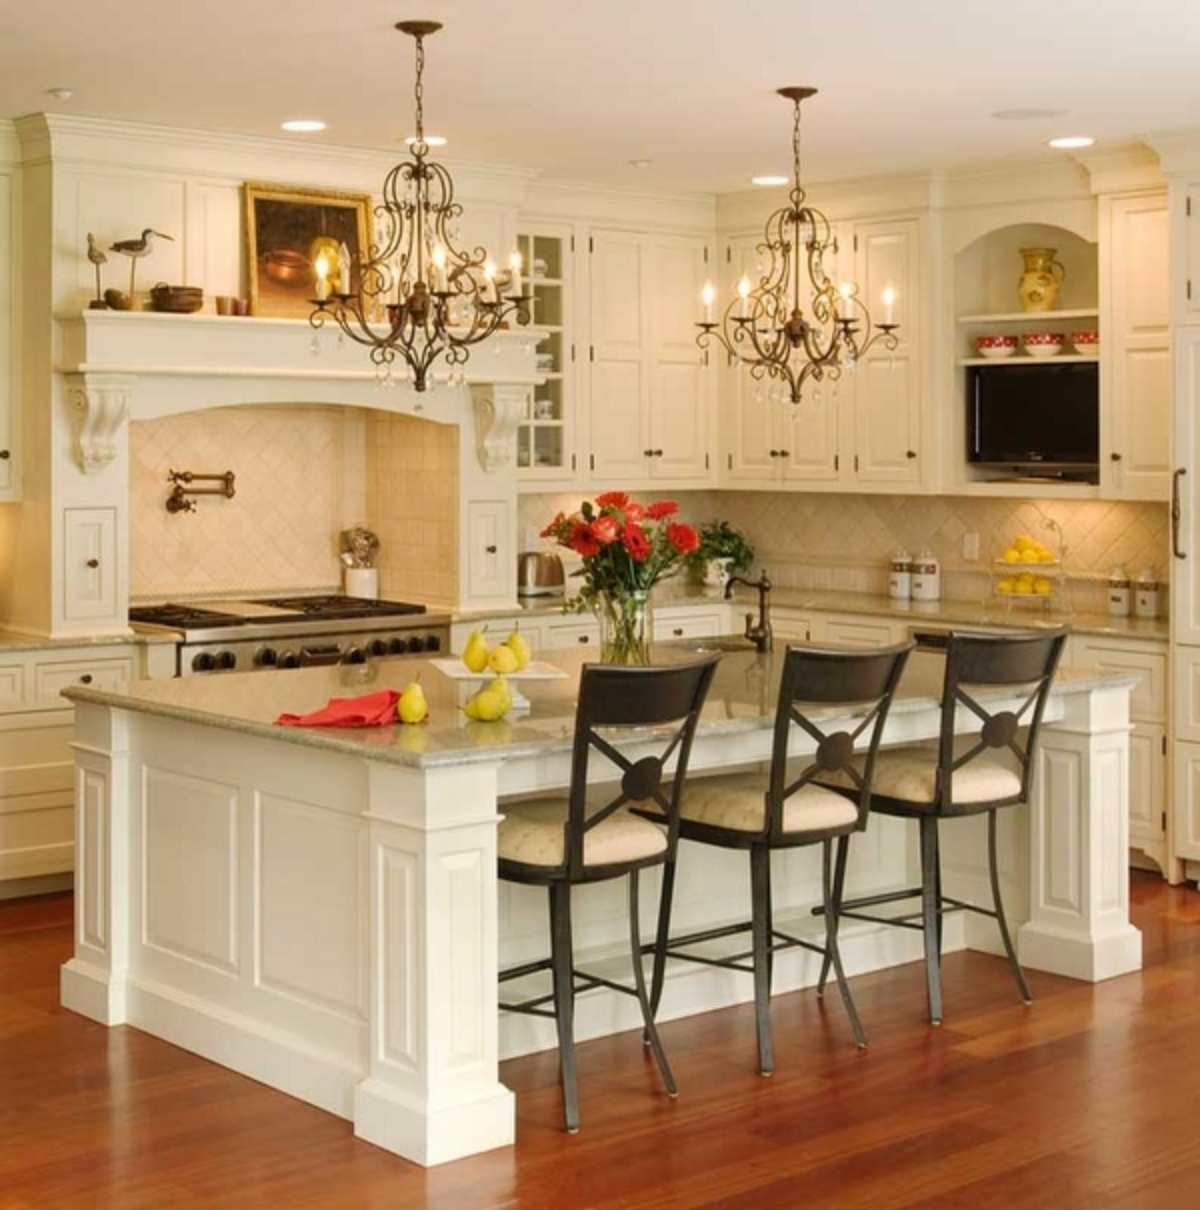 Kitchen island with seating – practical and functional ideas